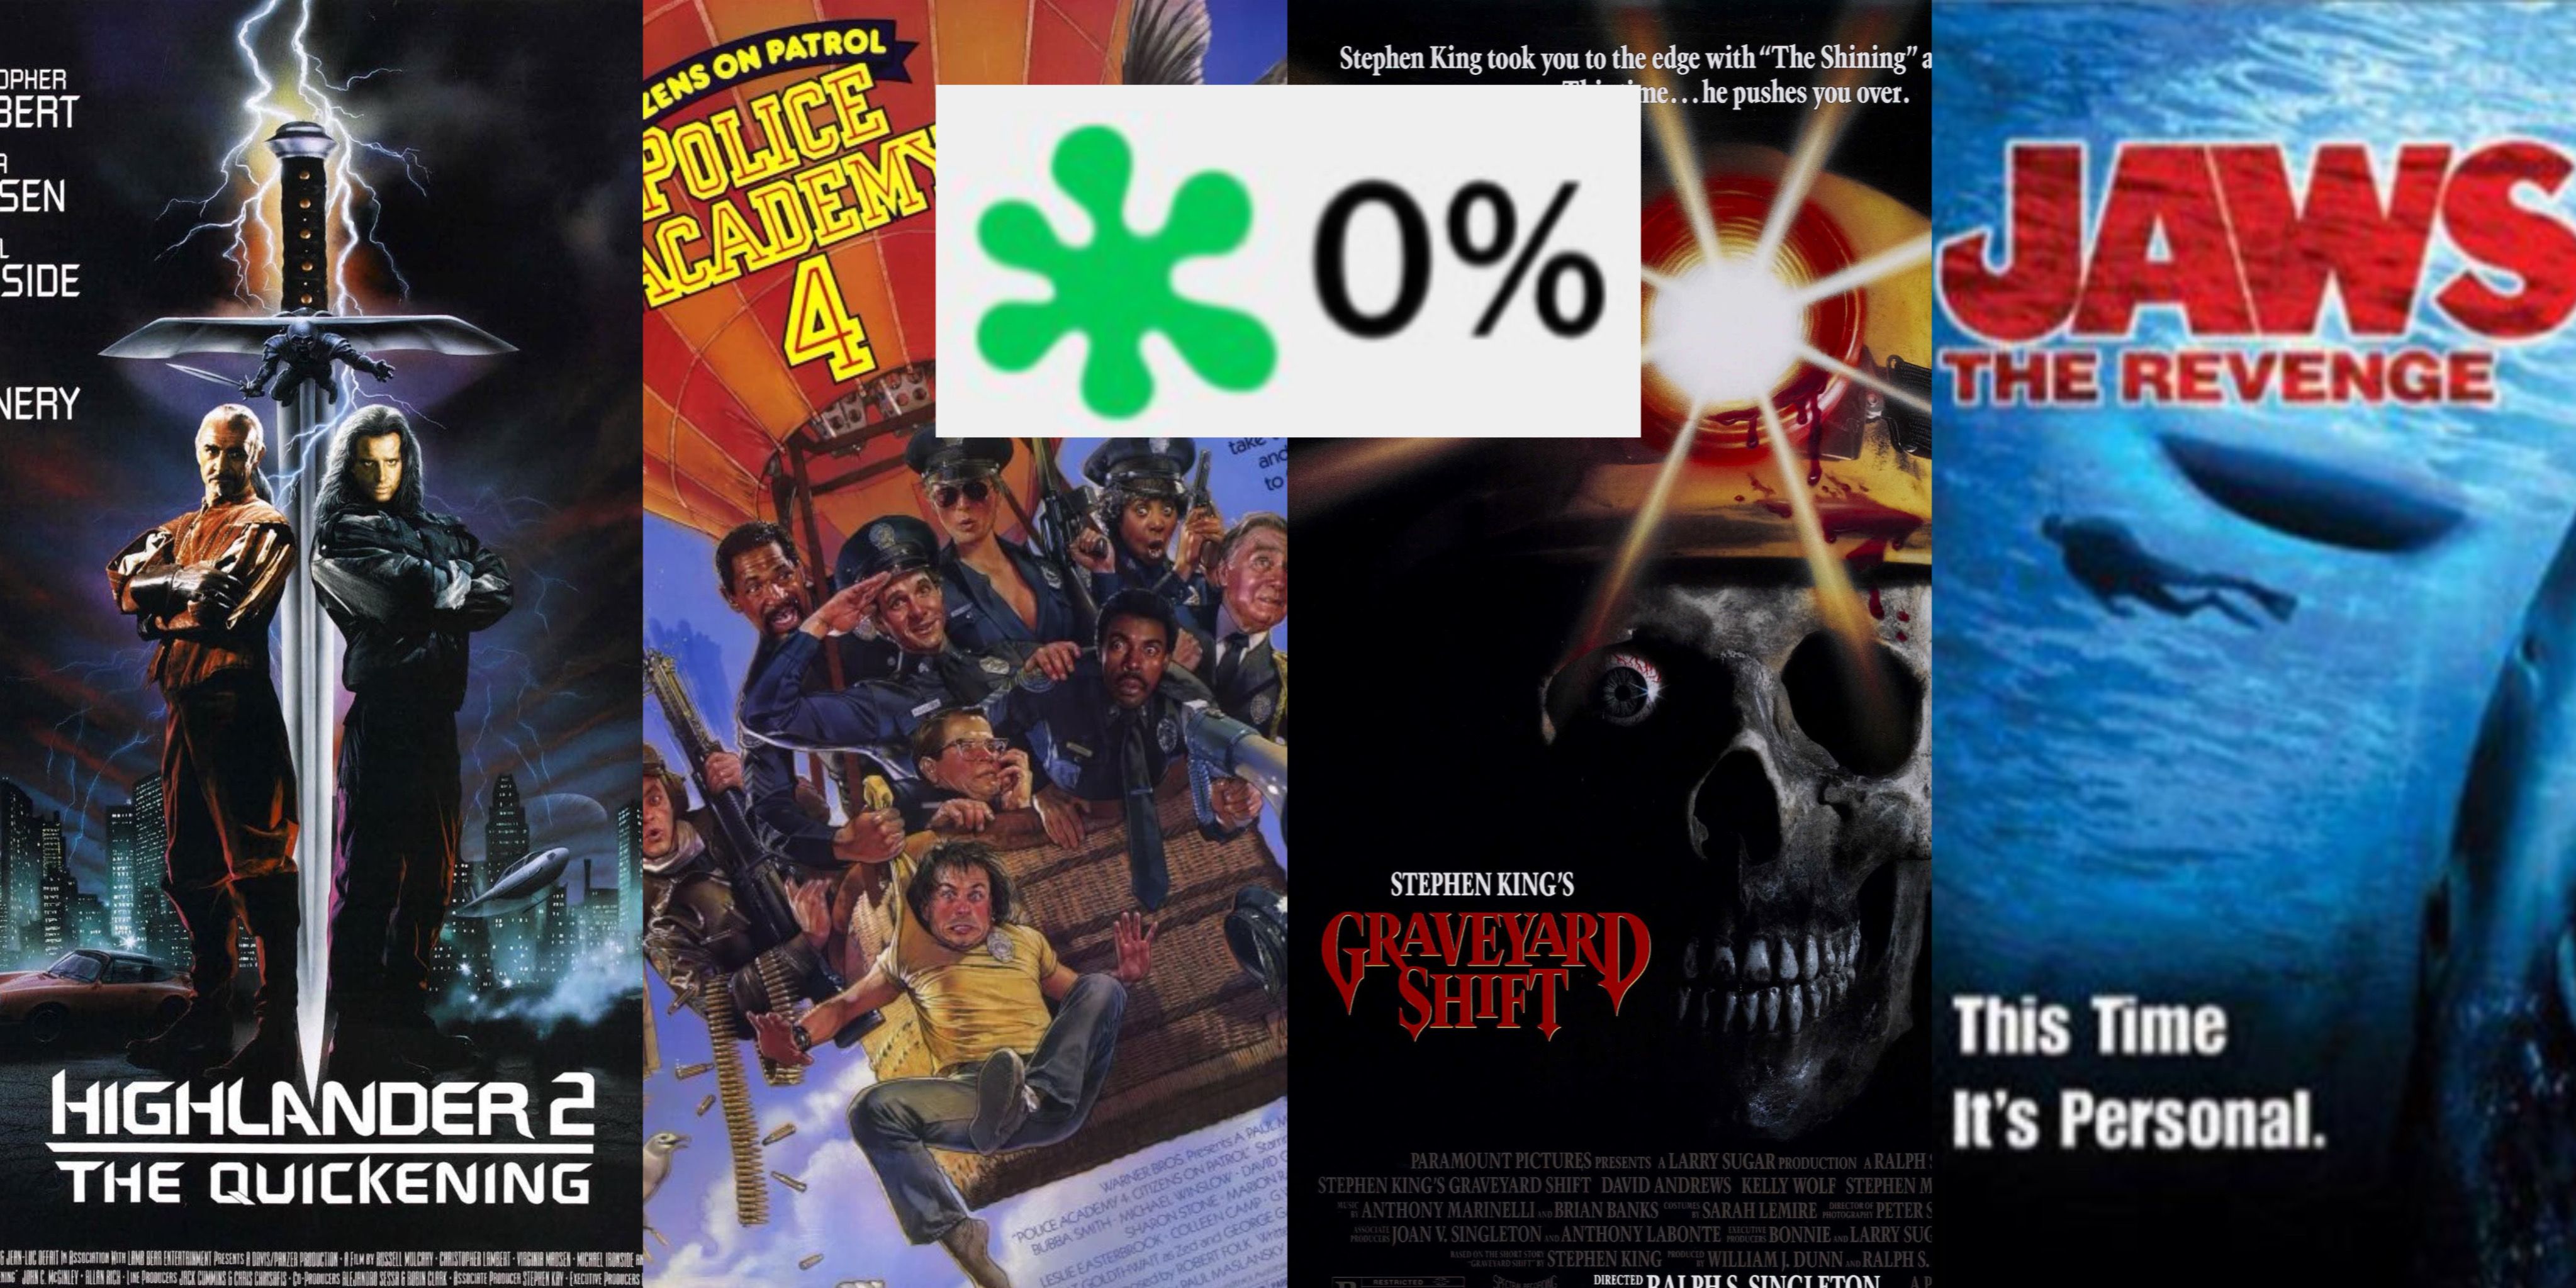 Our favorite movies that were rated worst by Rotten Tomatoes critics